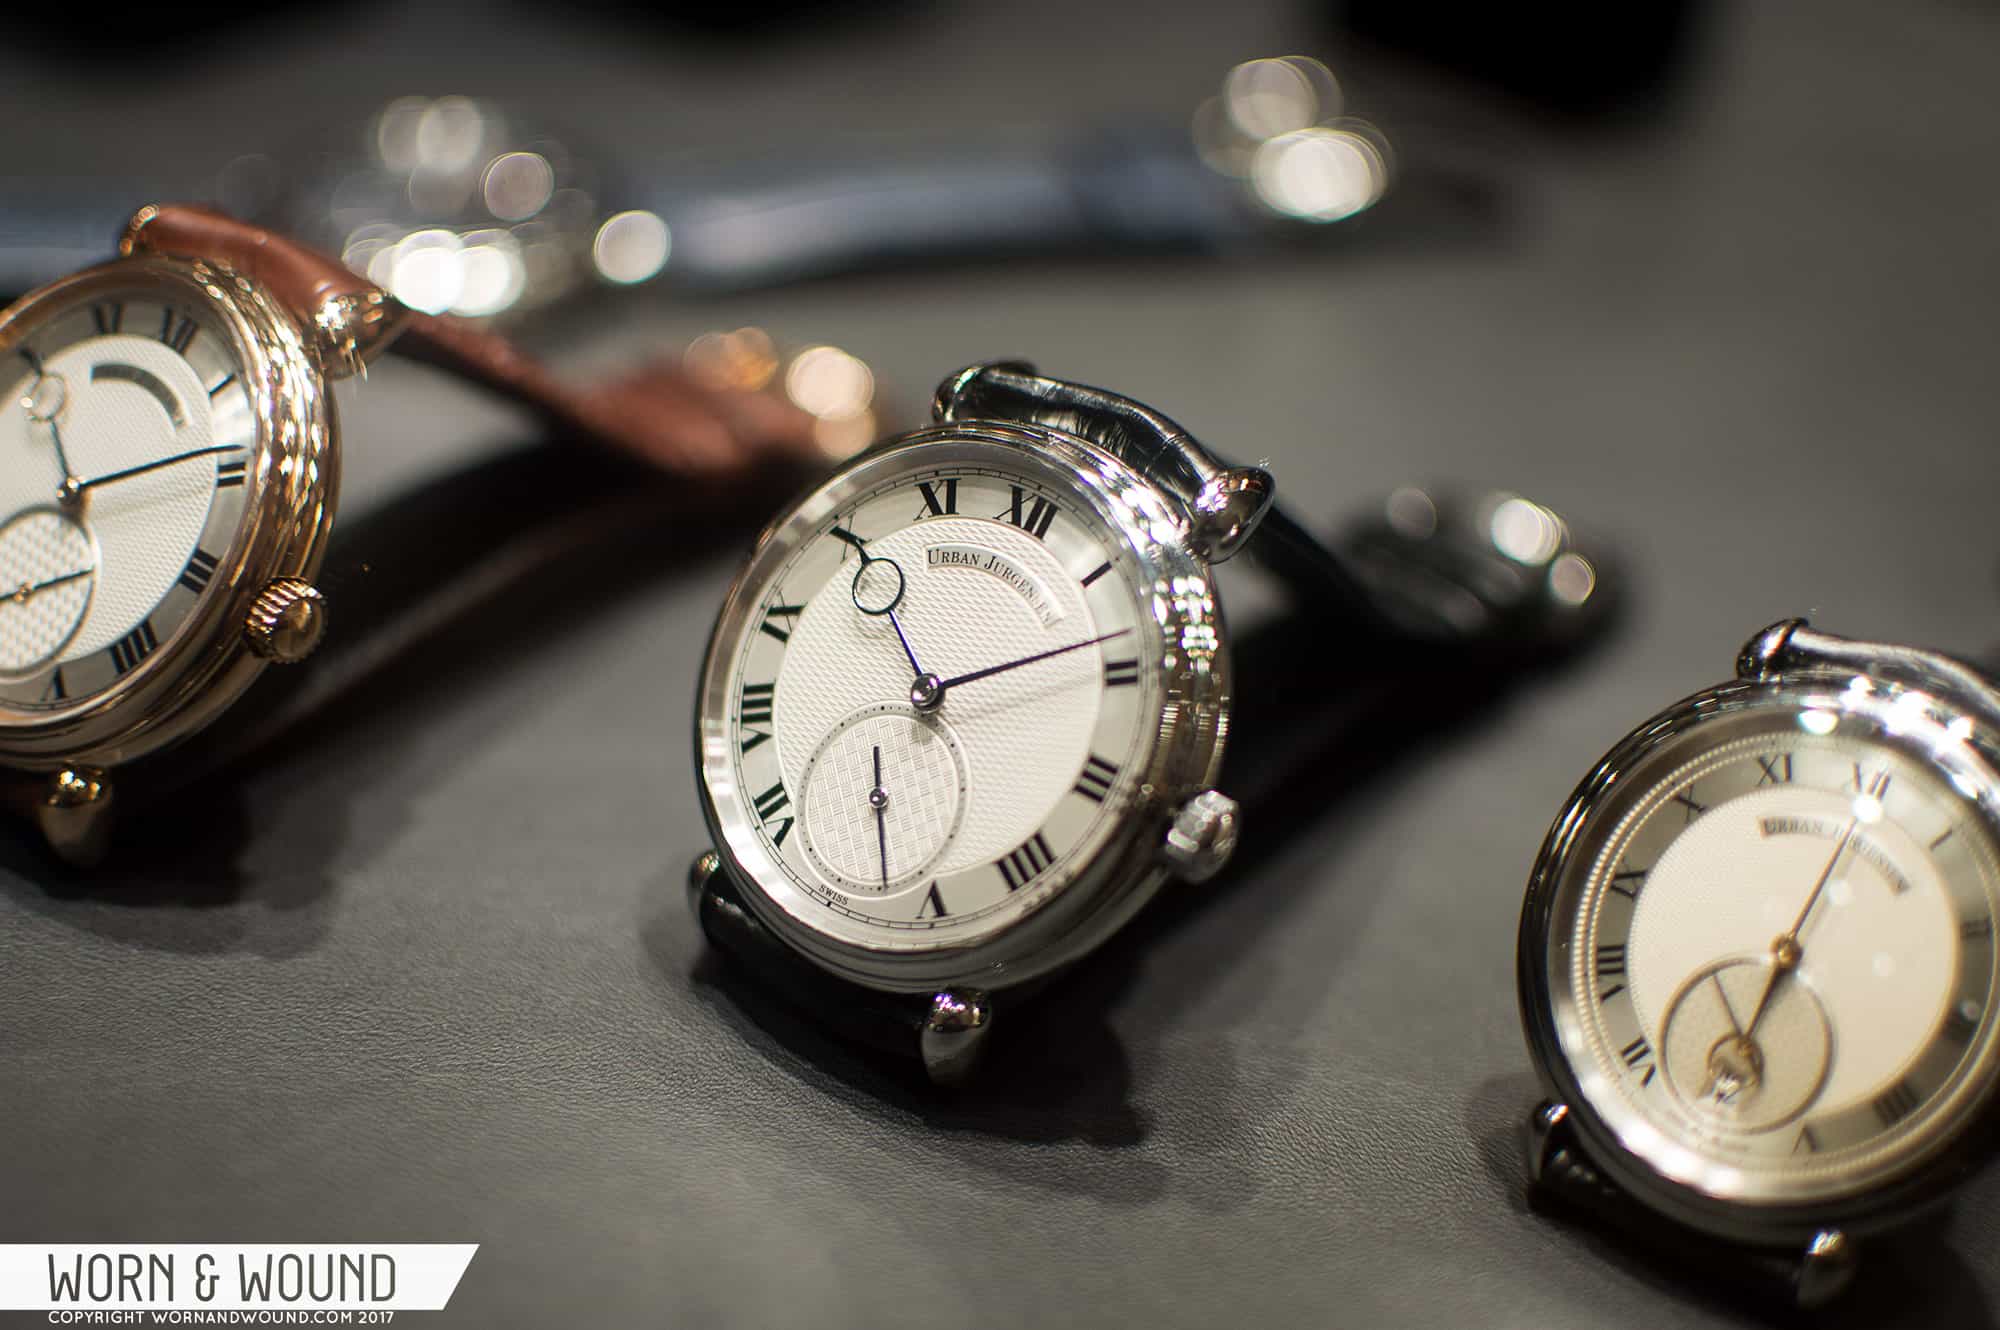 W&W's Highlights From This Year's Salon QP - Worn & Wound